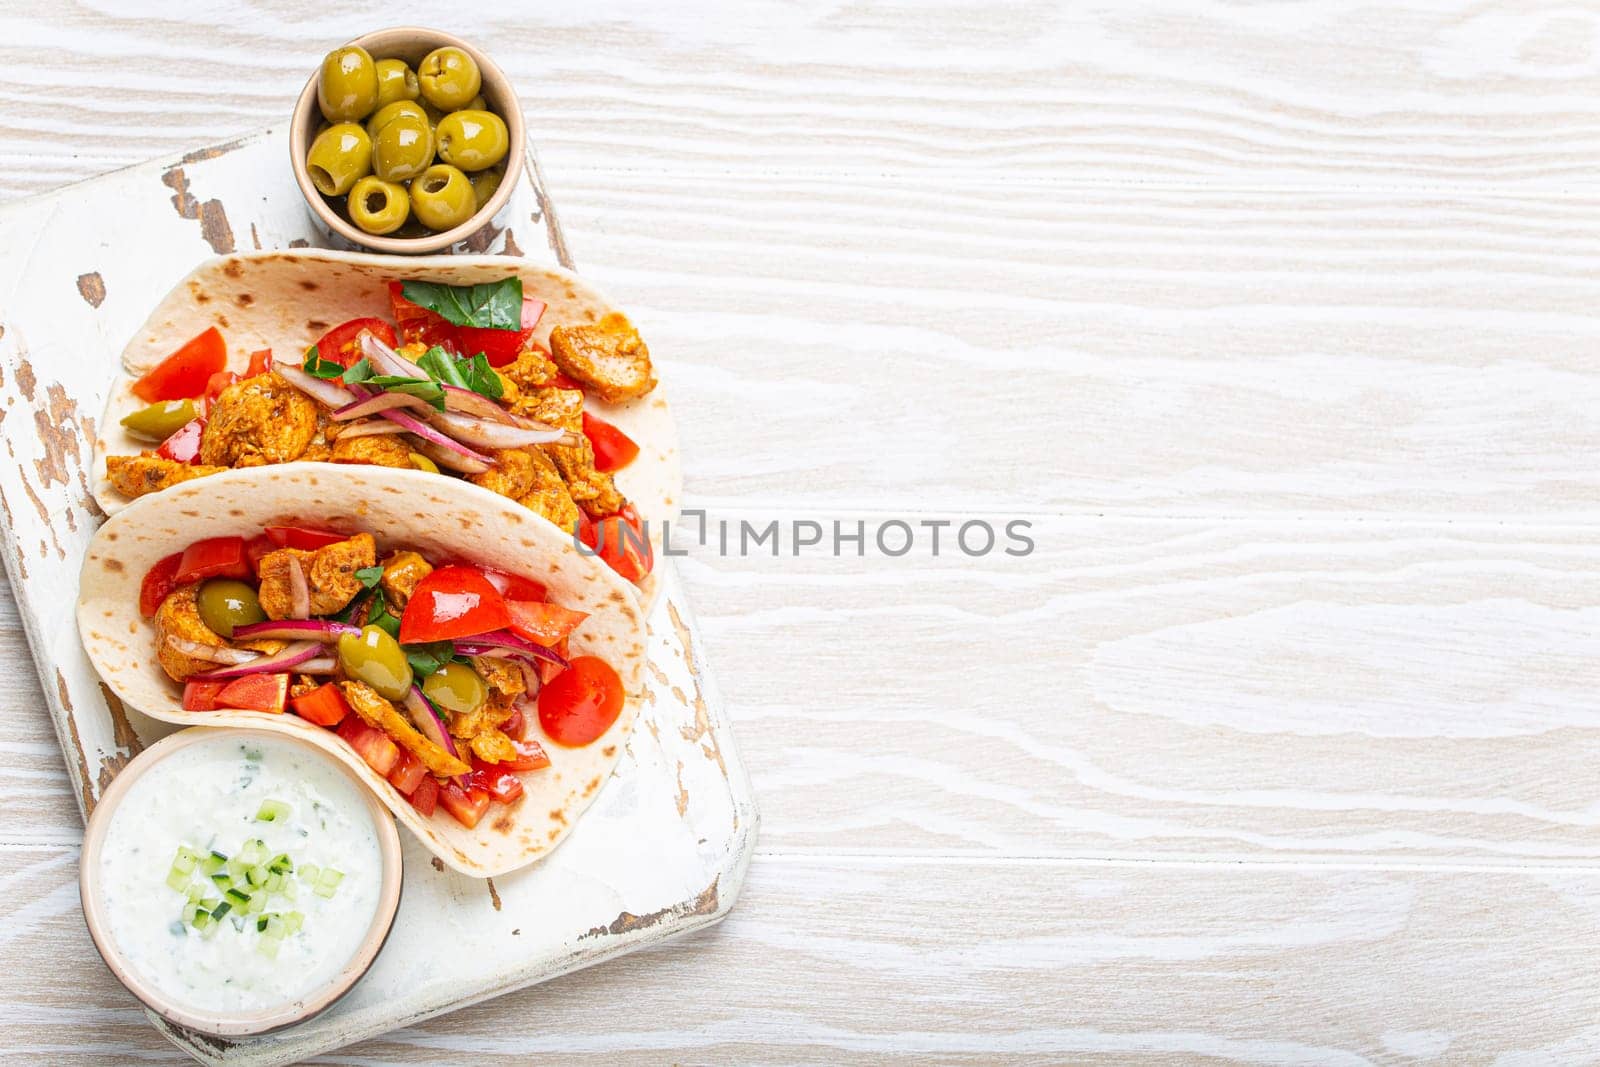 Traditional Greek Dish Gyros: Pita bread Wraps with vegetables, meat, herbs, olives on rustic wooden cutting board with Tzatziki sauce, olive oil top view on white wooden background, space for text.